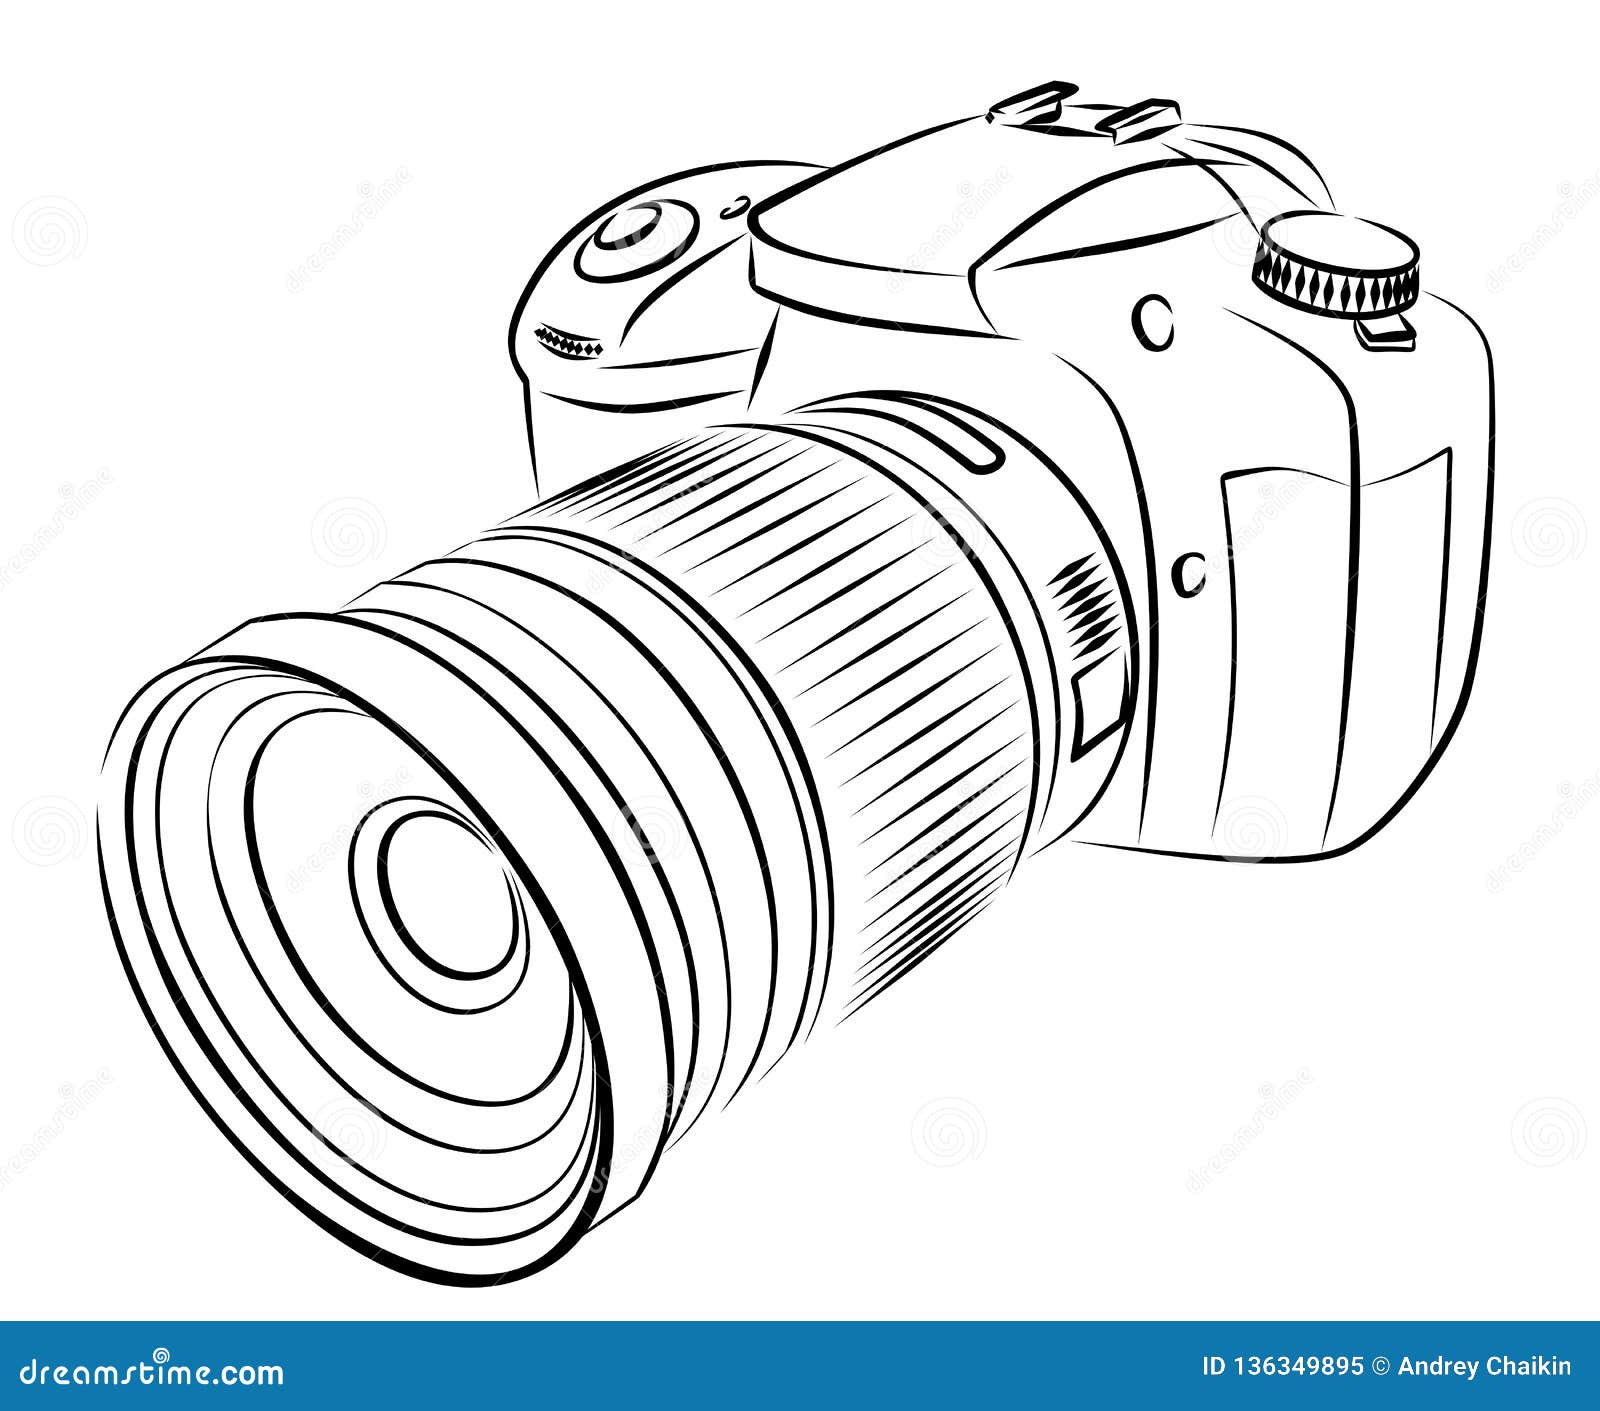 How to Draw a Camera - Easy Drawing Art